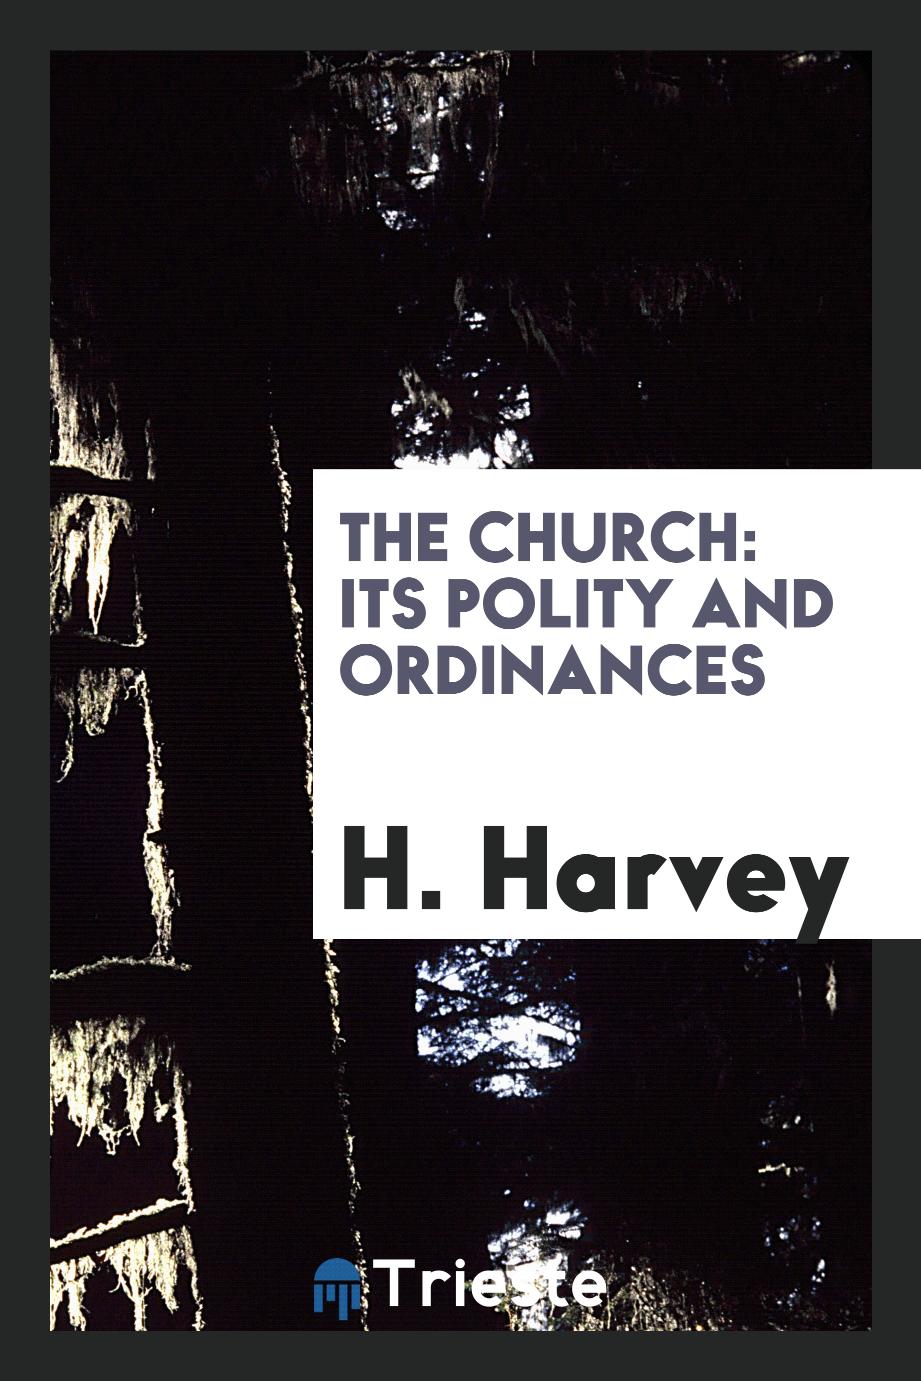 The church: its polity and ordinances